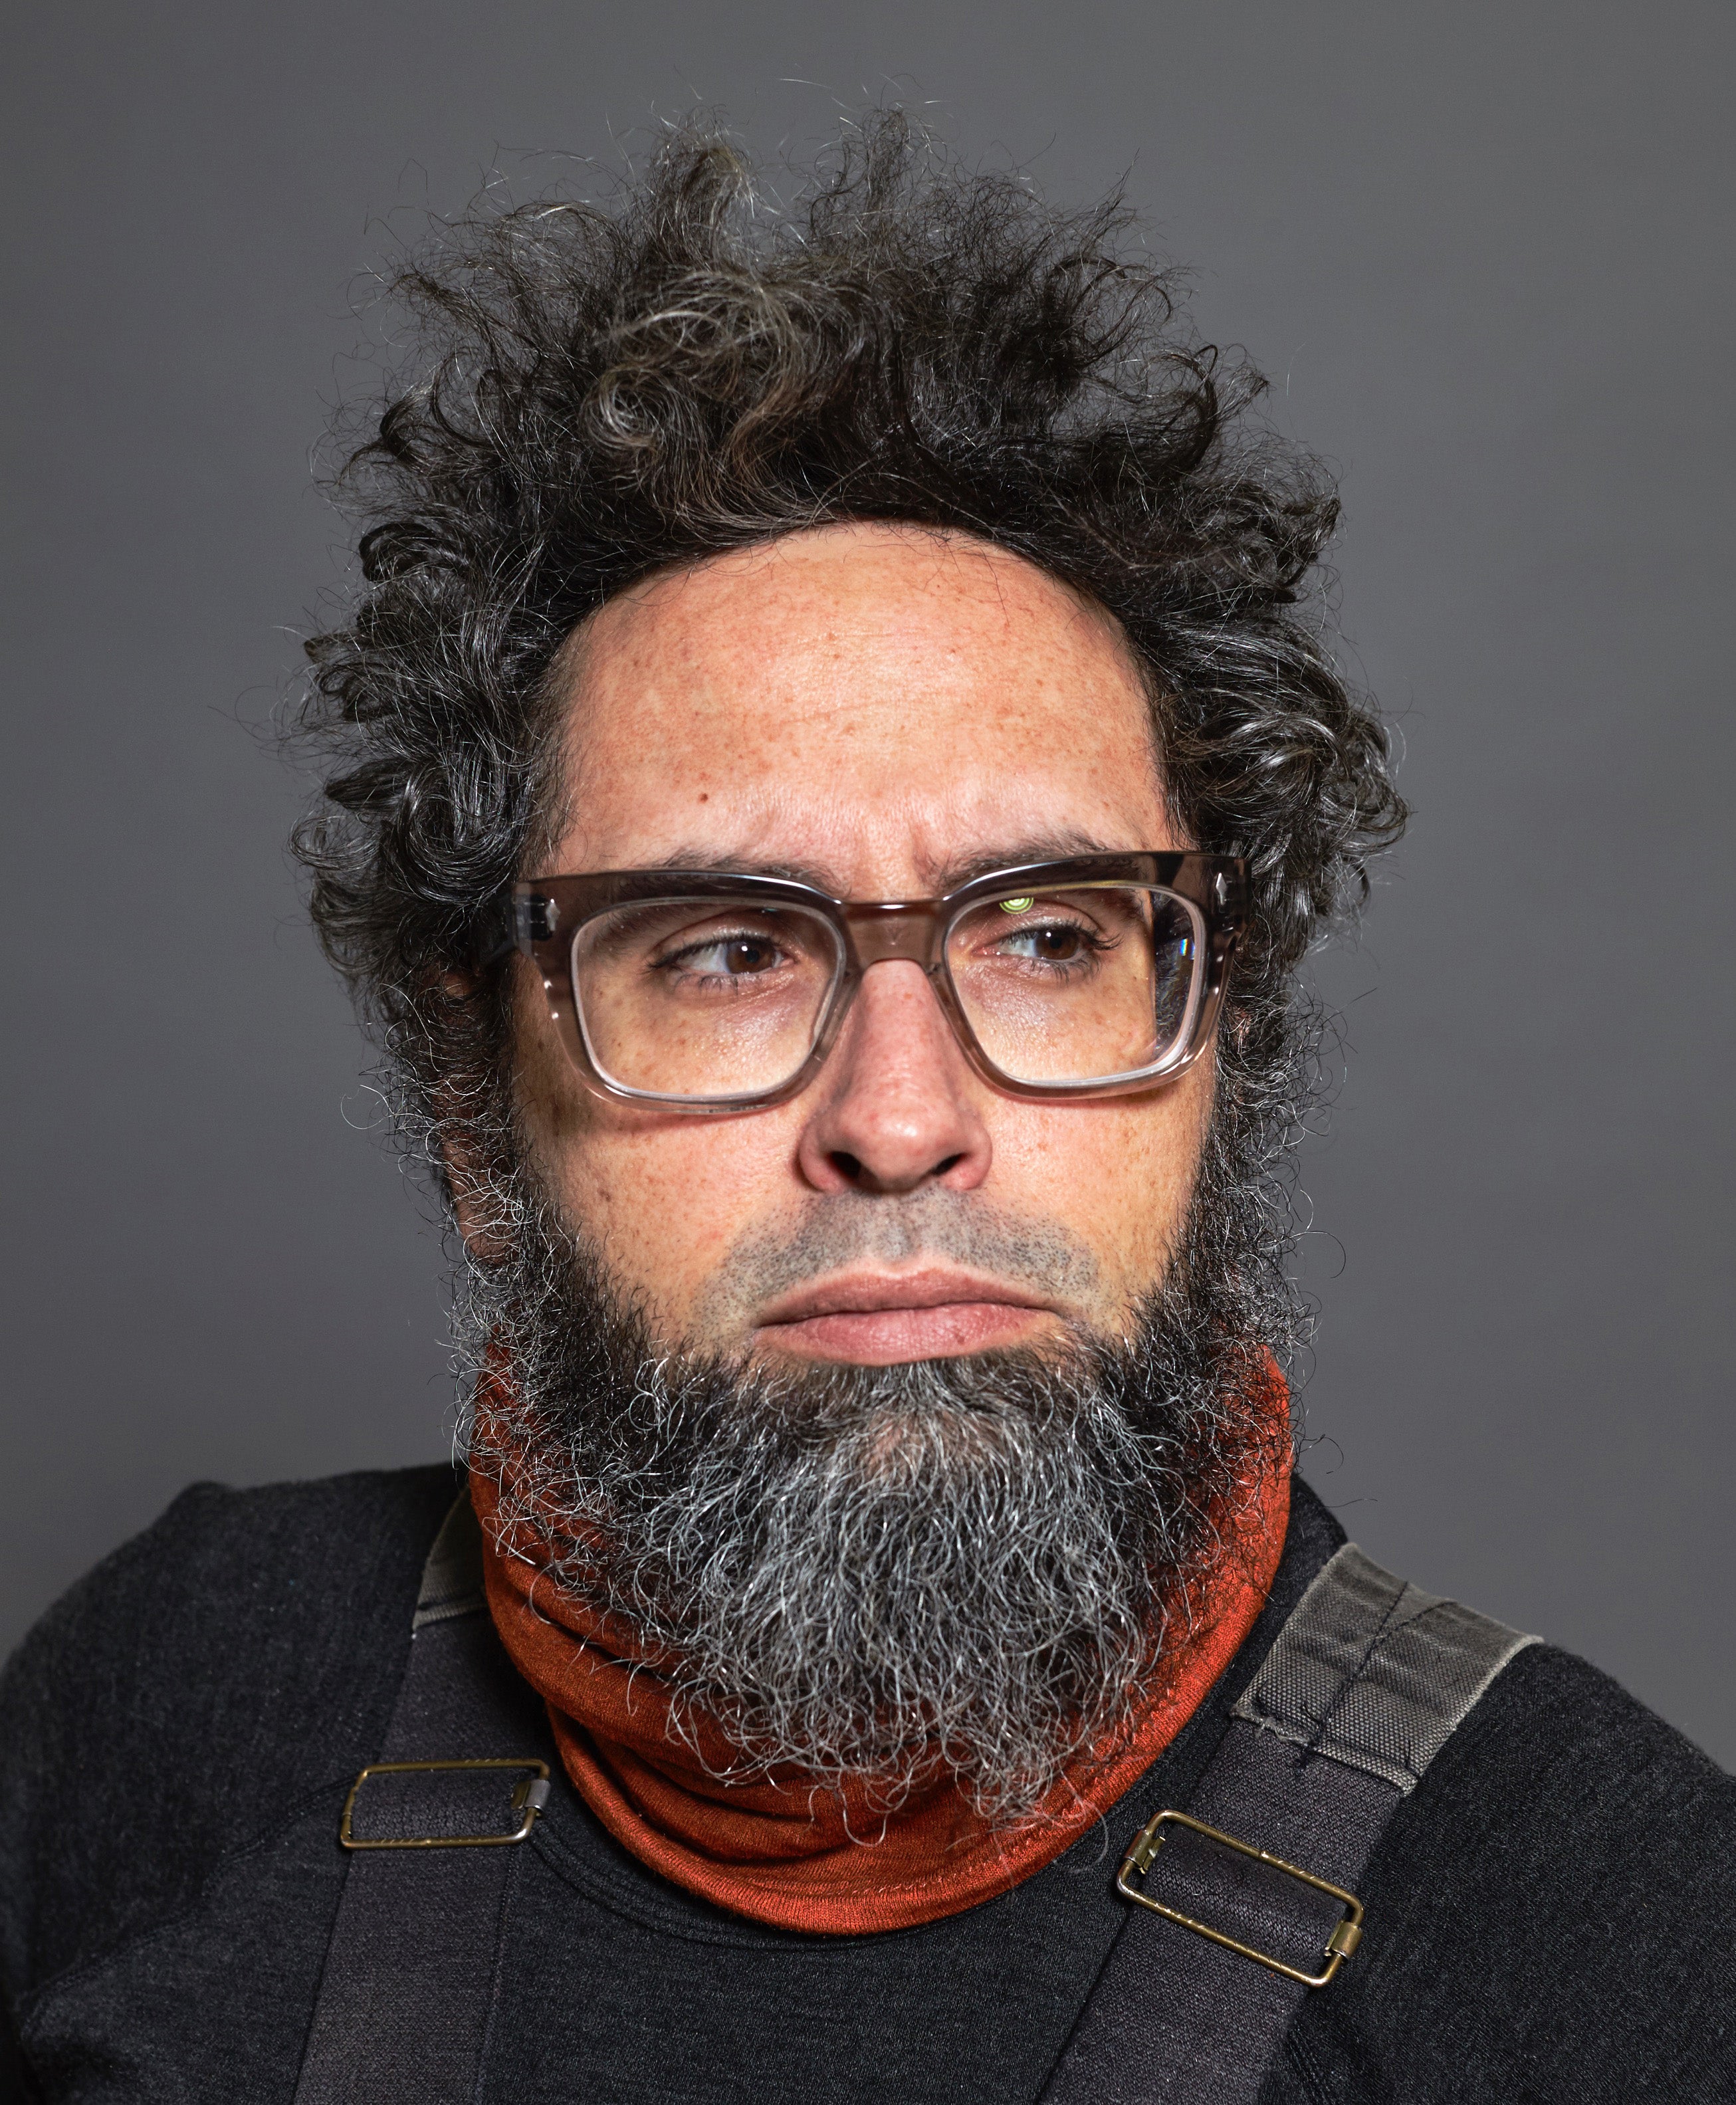 man with curly hair and glasses and beard